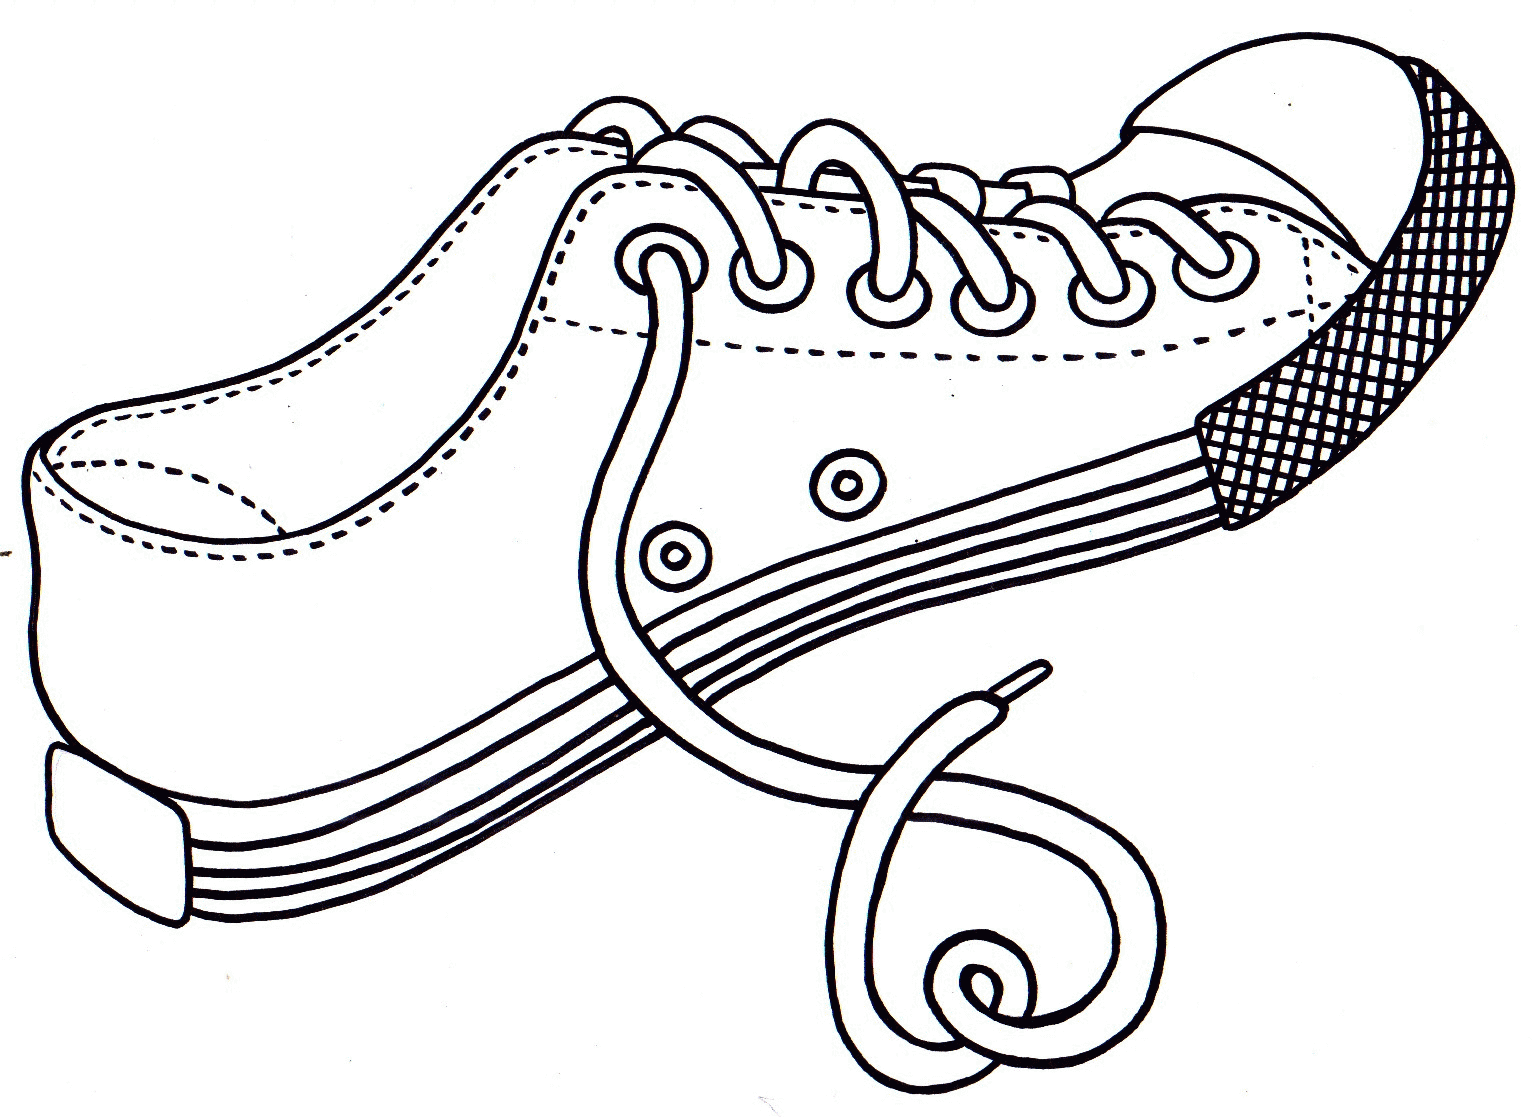 Coloring Pages For Shoes Printable - Coloring